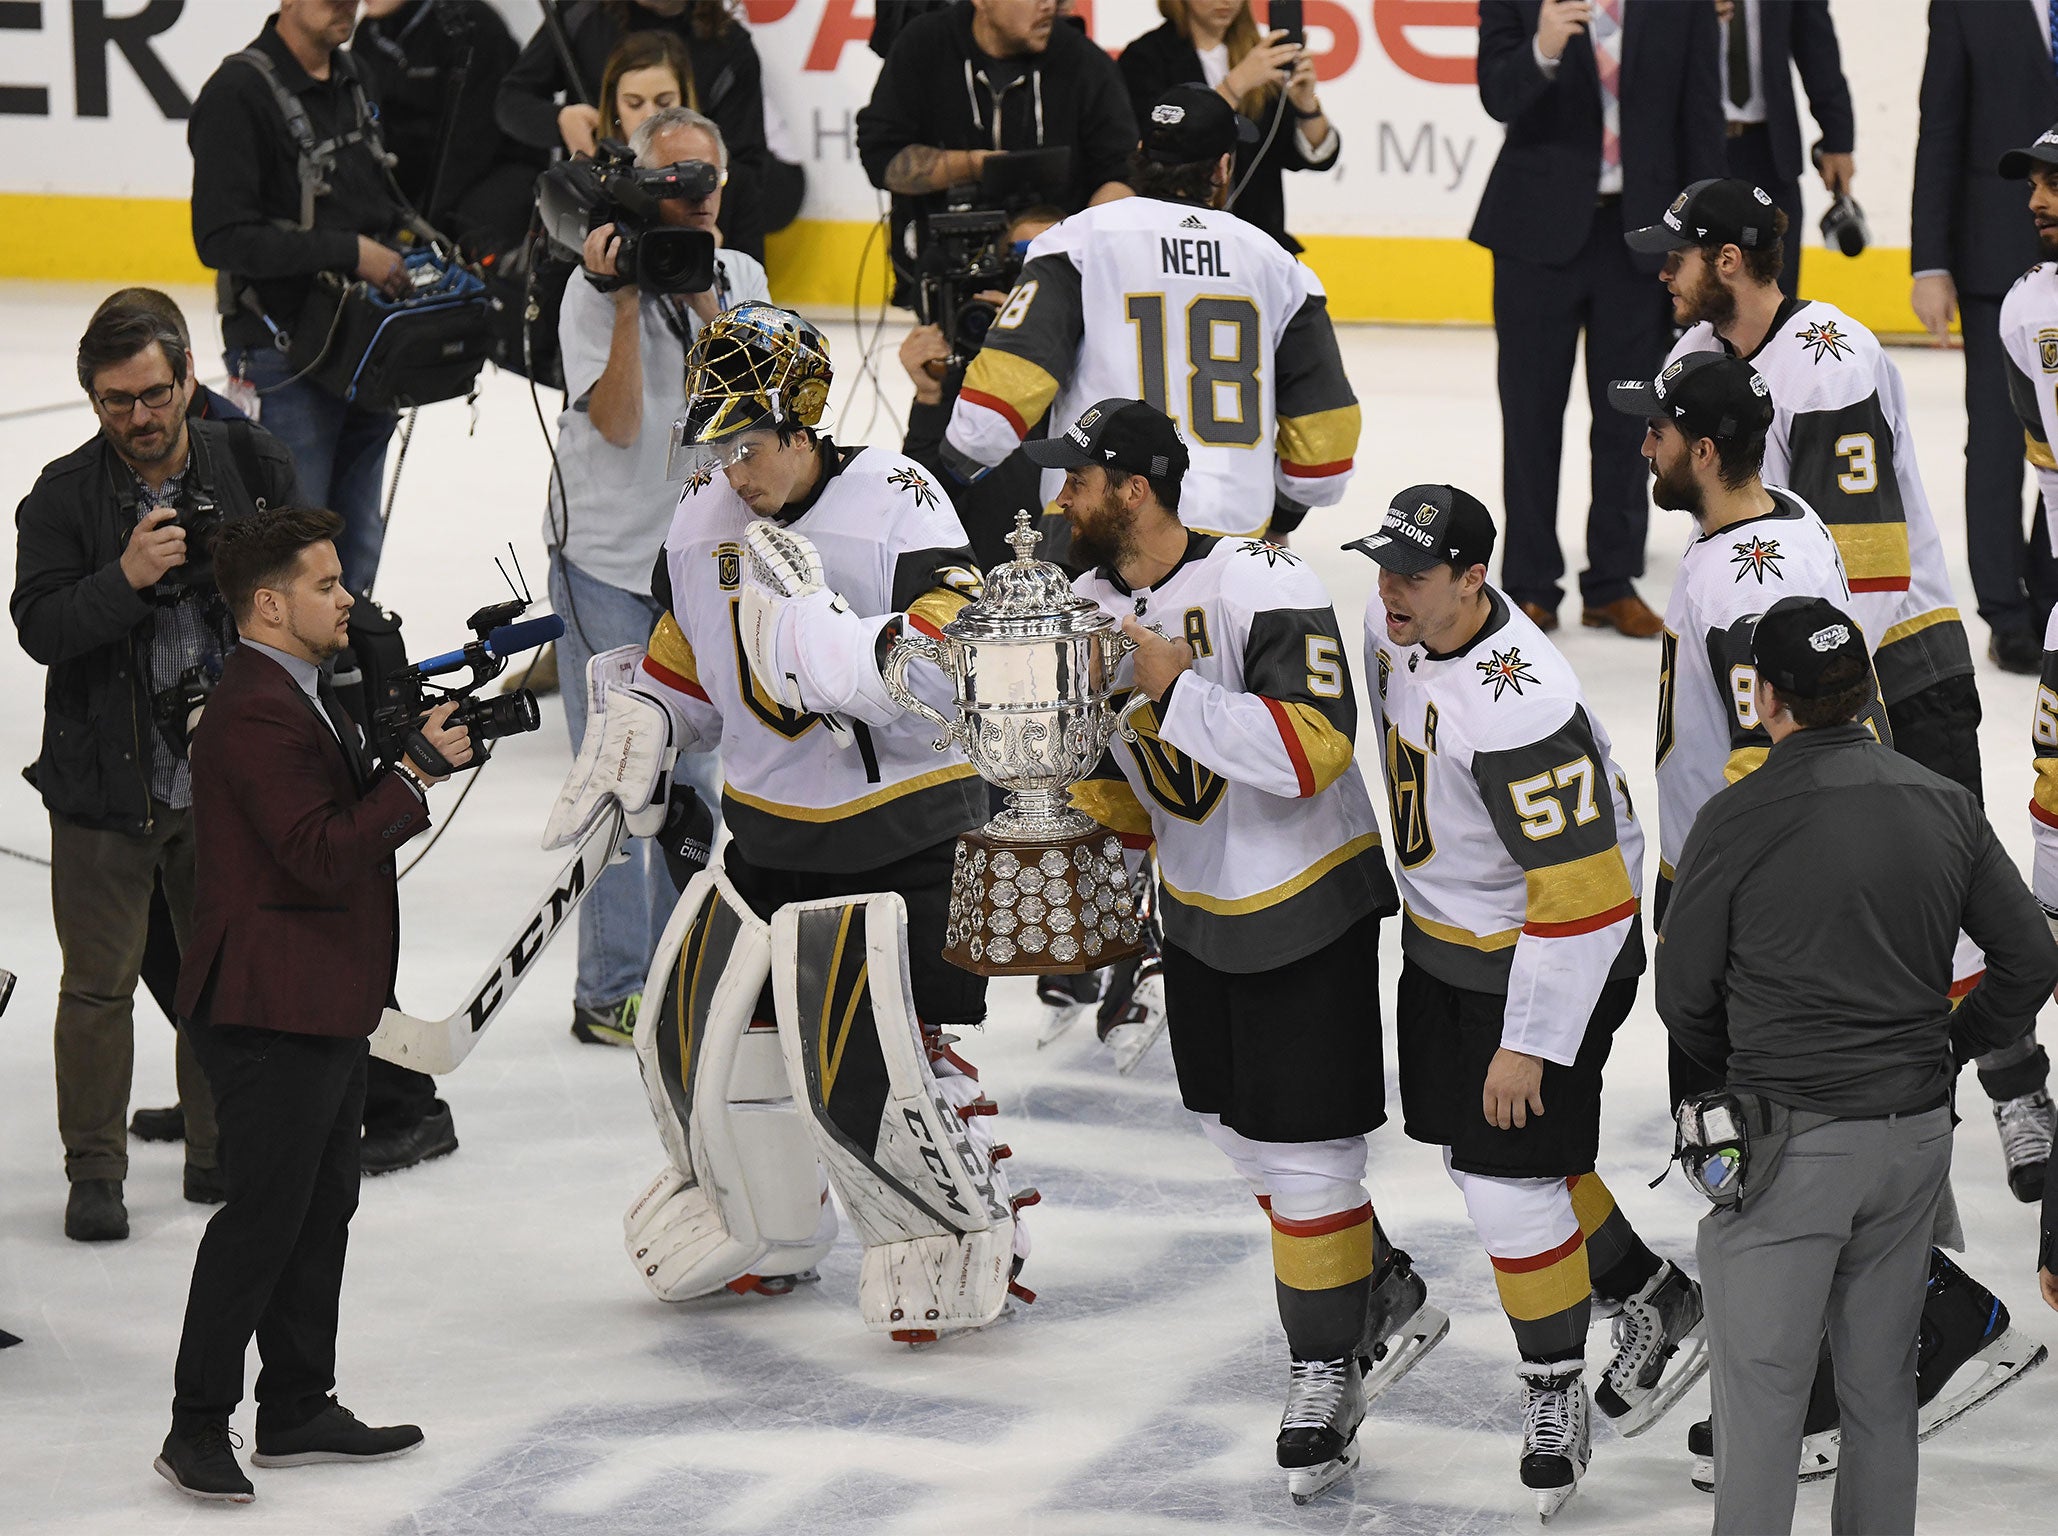 Vegas Golden Knights Win Their First Stanley Cup - The New York Times